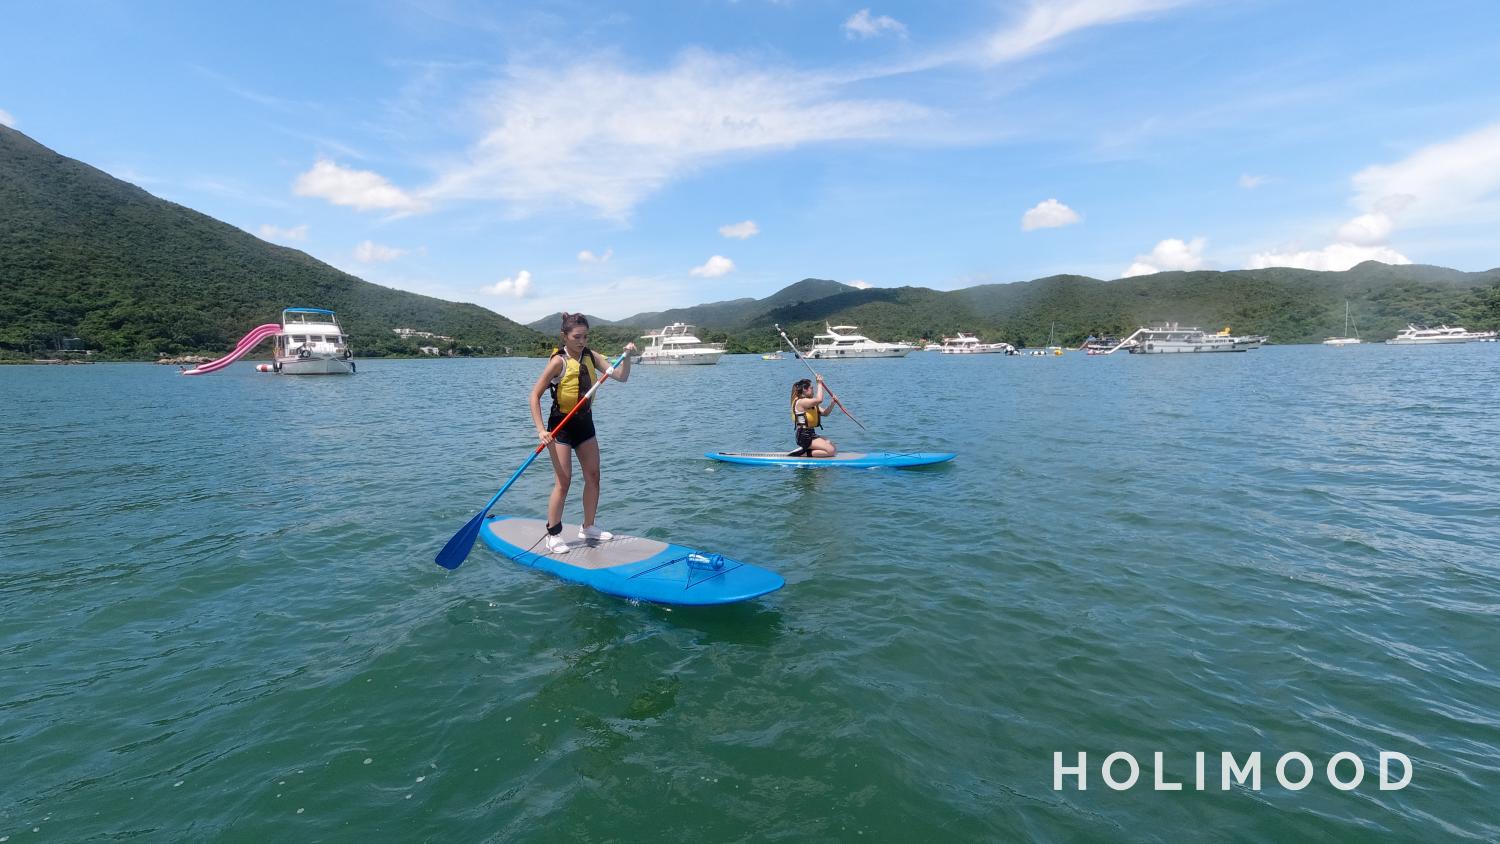 【Sai Kung】SUP Board Experience with Guidance - Charter (min. 8 pax)